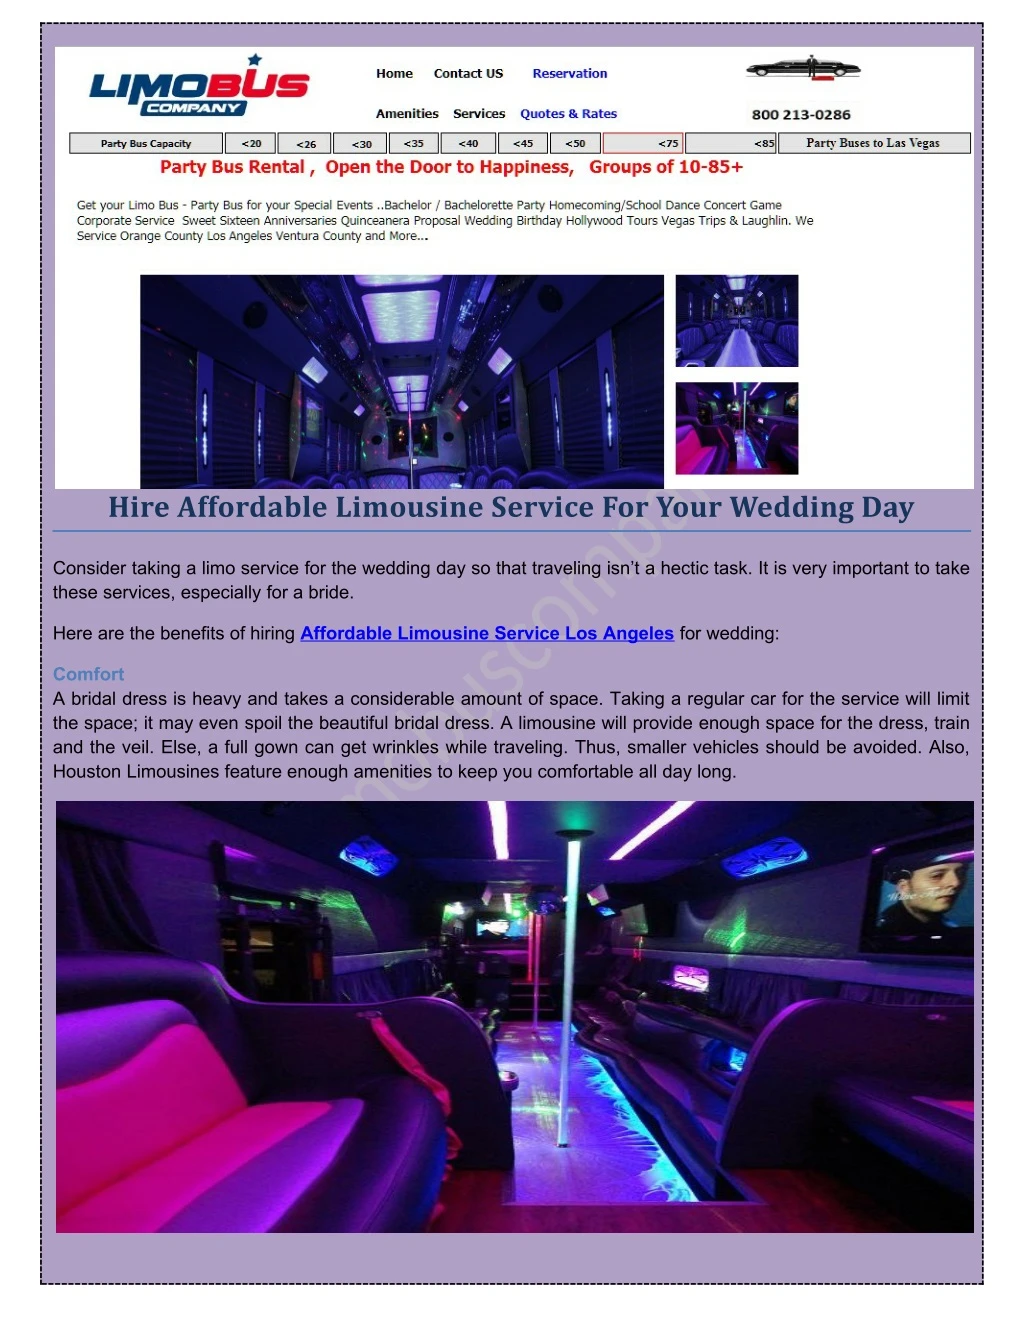 hire affordable limousine service for your